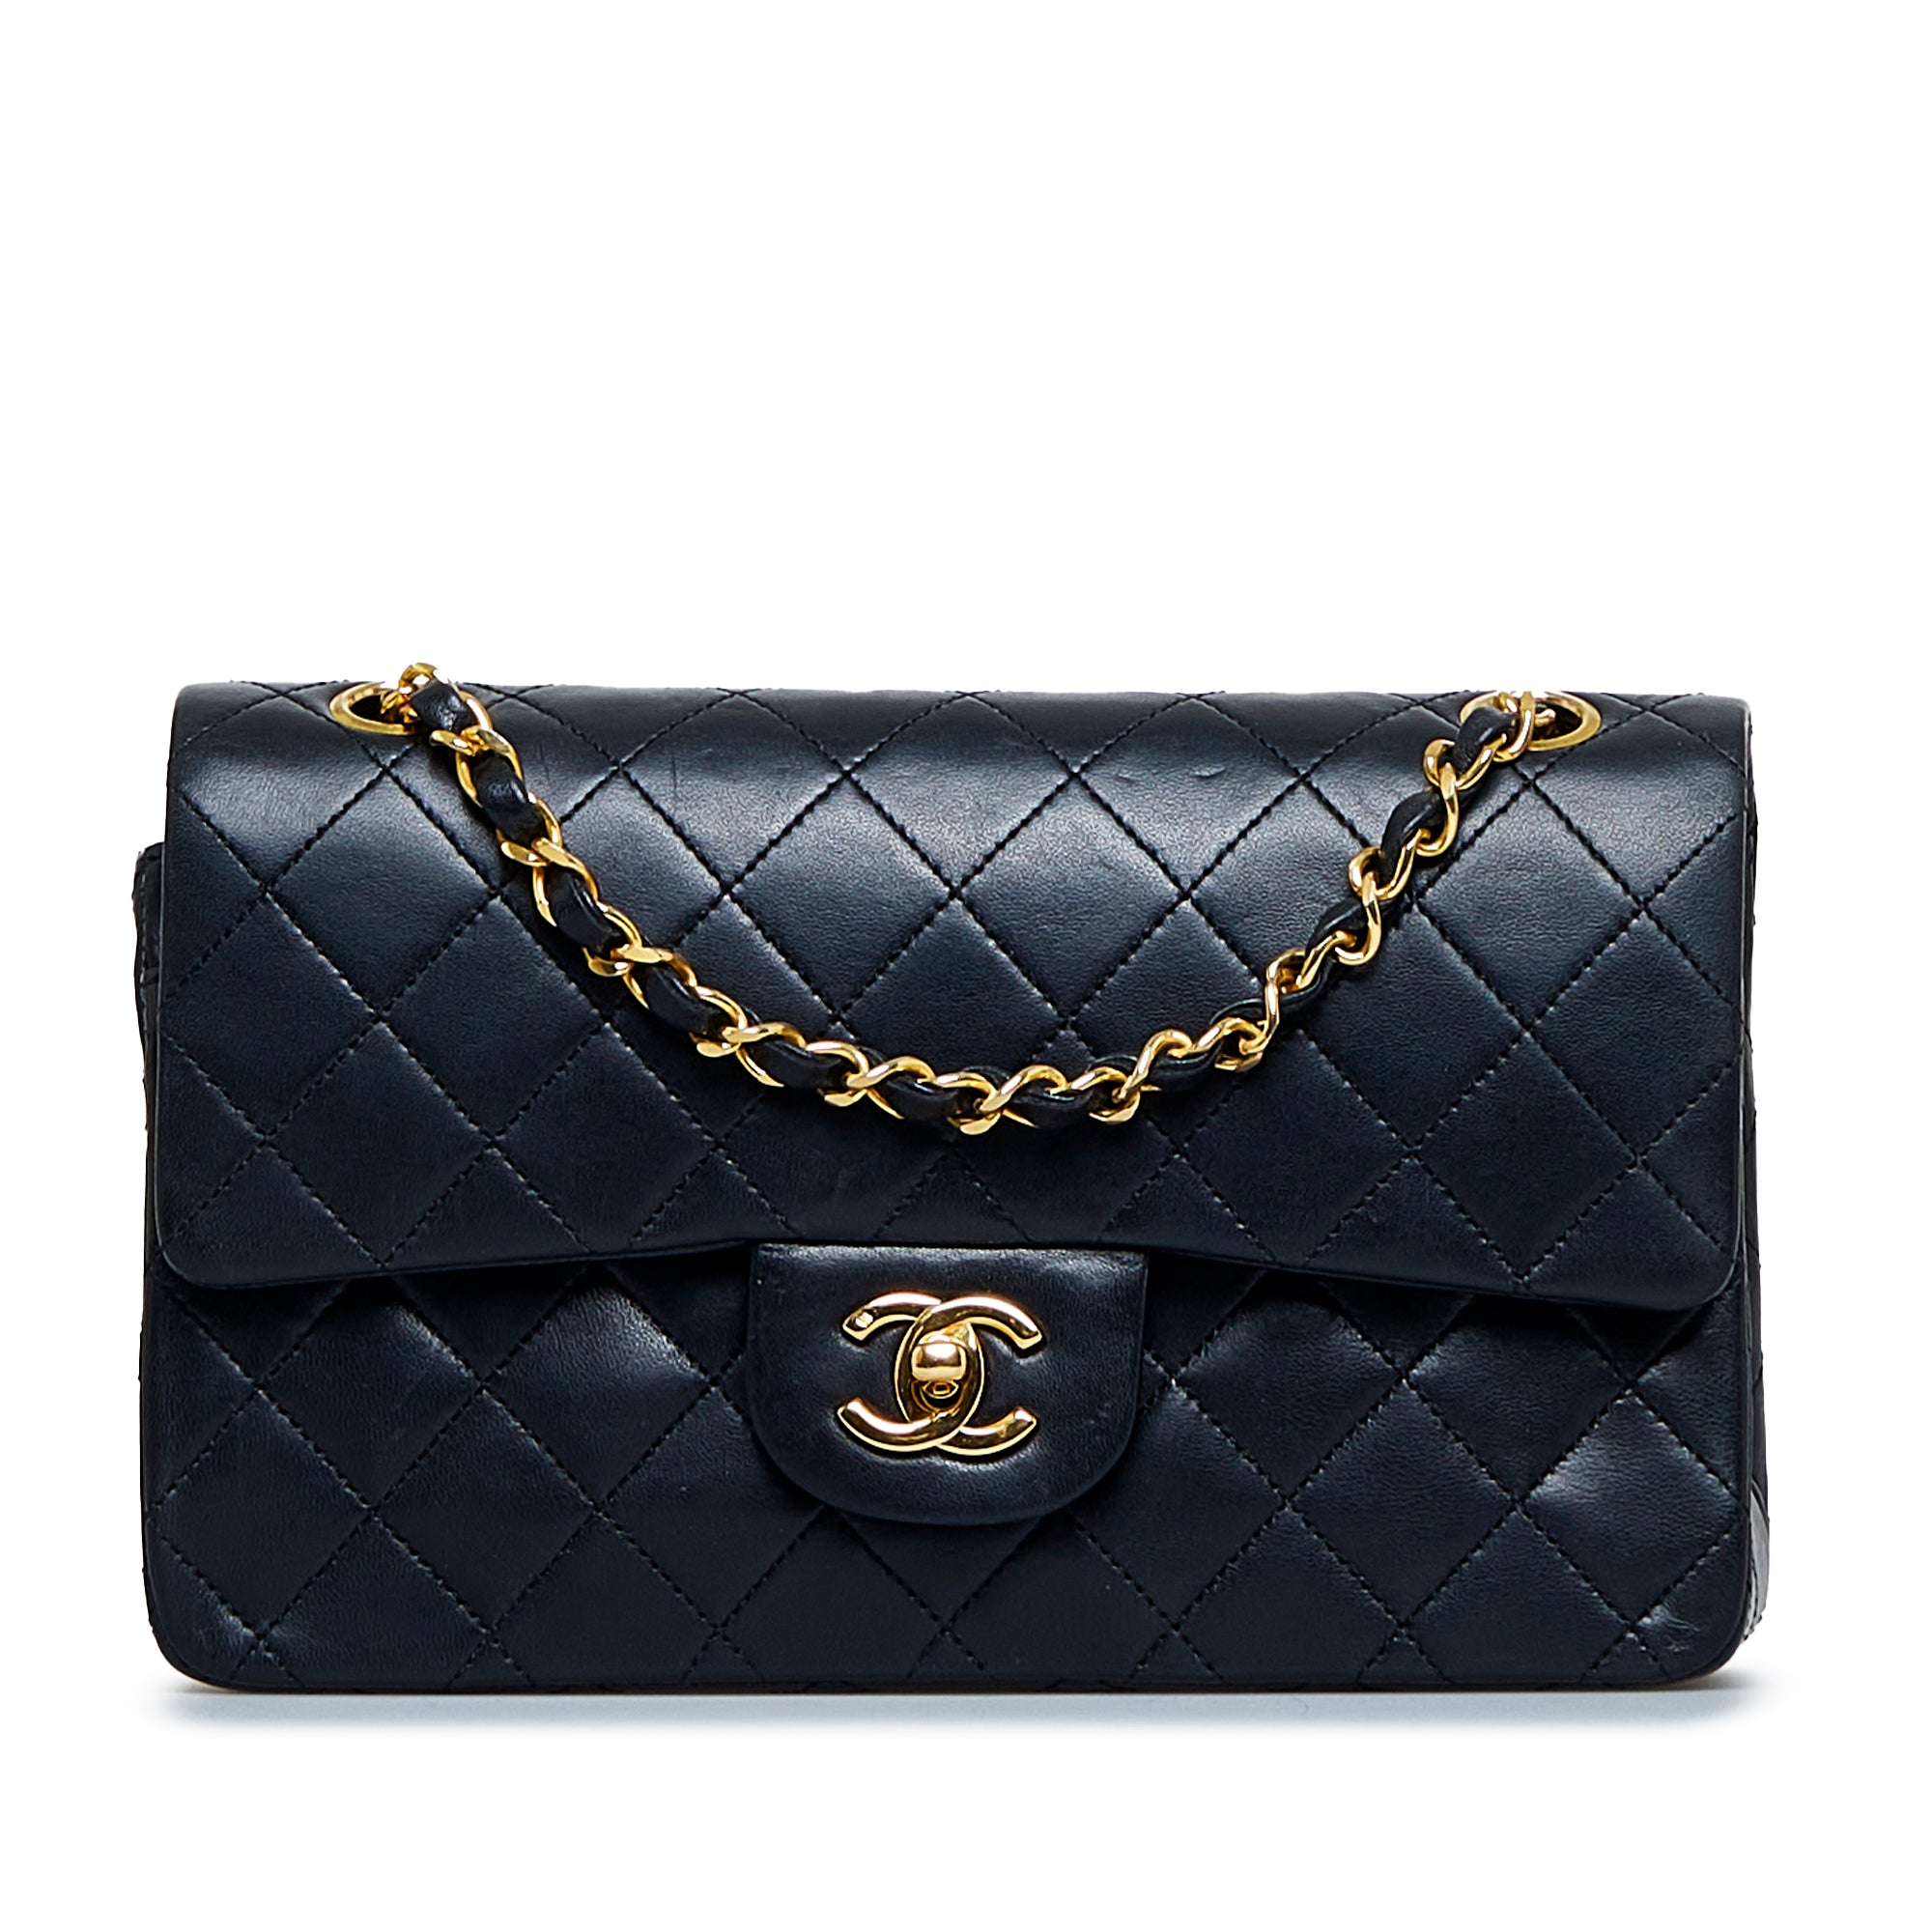 Black Chanel Small Classic Lambskin Double Flap Shoulder Bag, RvceShops  Revival